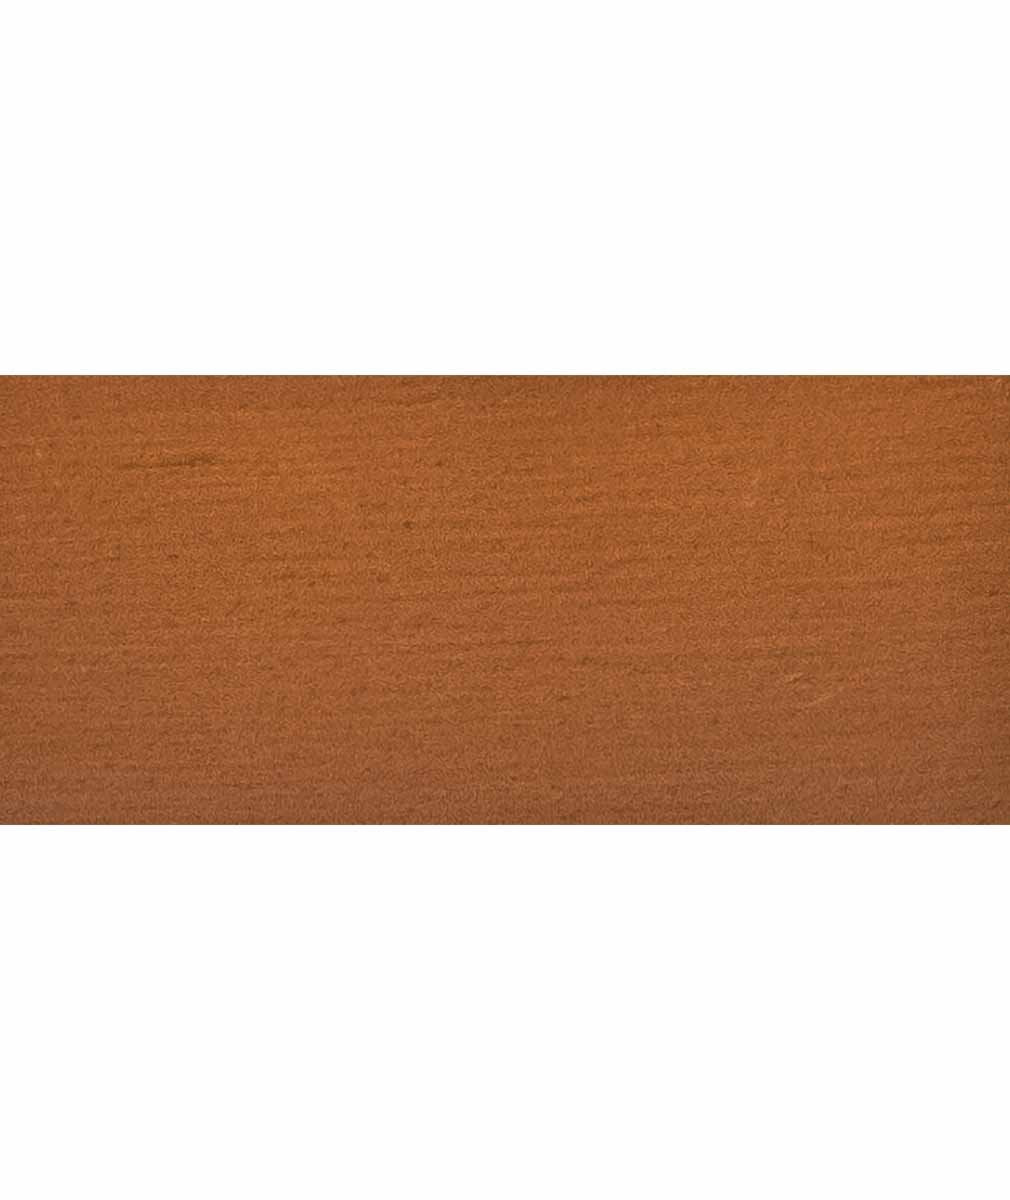 Shop Benjamin Moore&#39;s California Rustic Arborcoat Semi-Solid Stain  from JC Licht